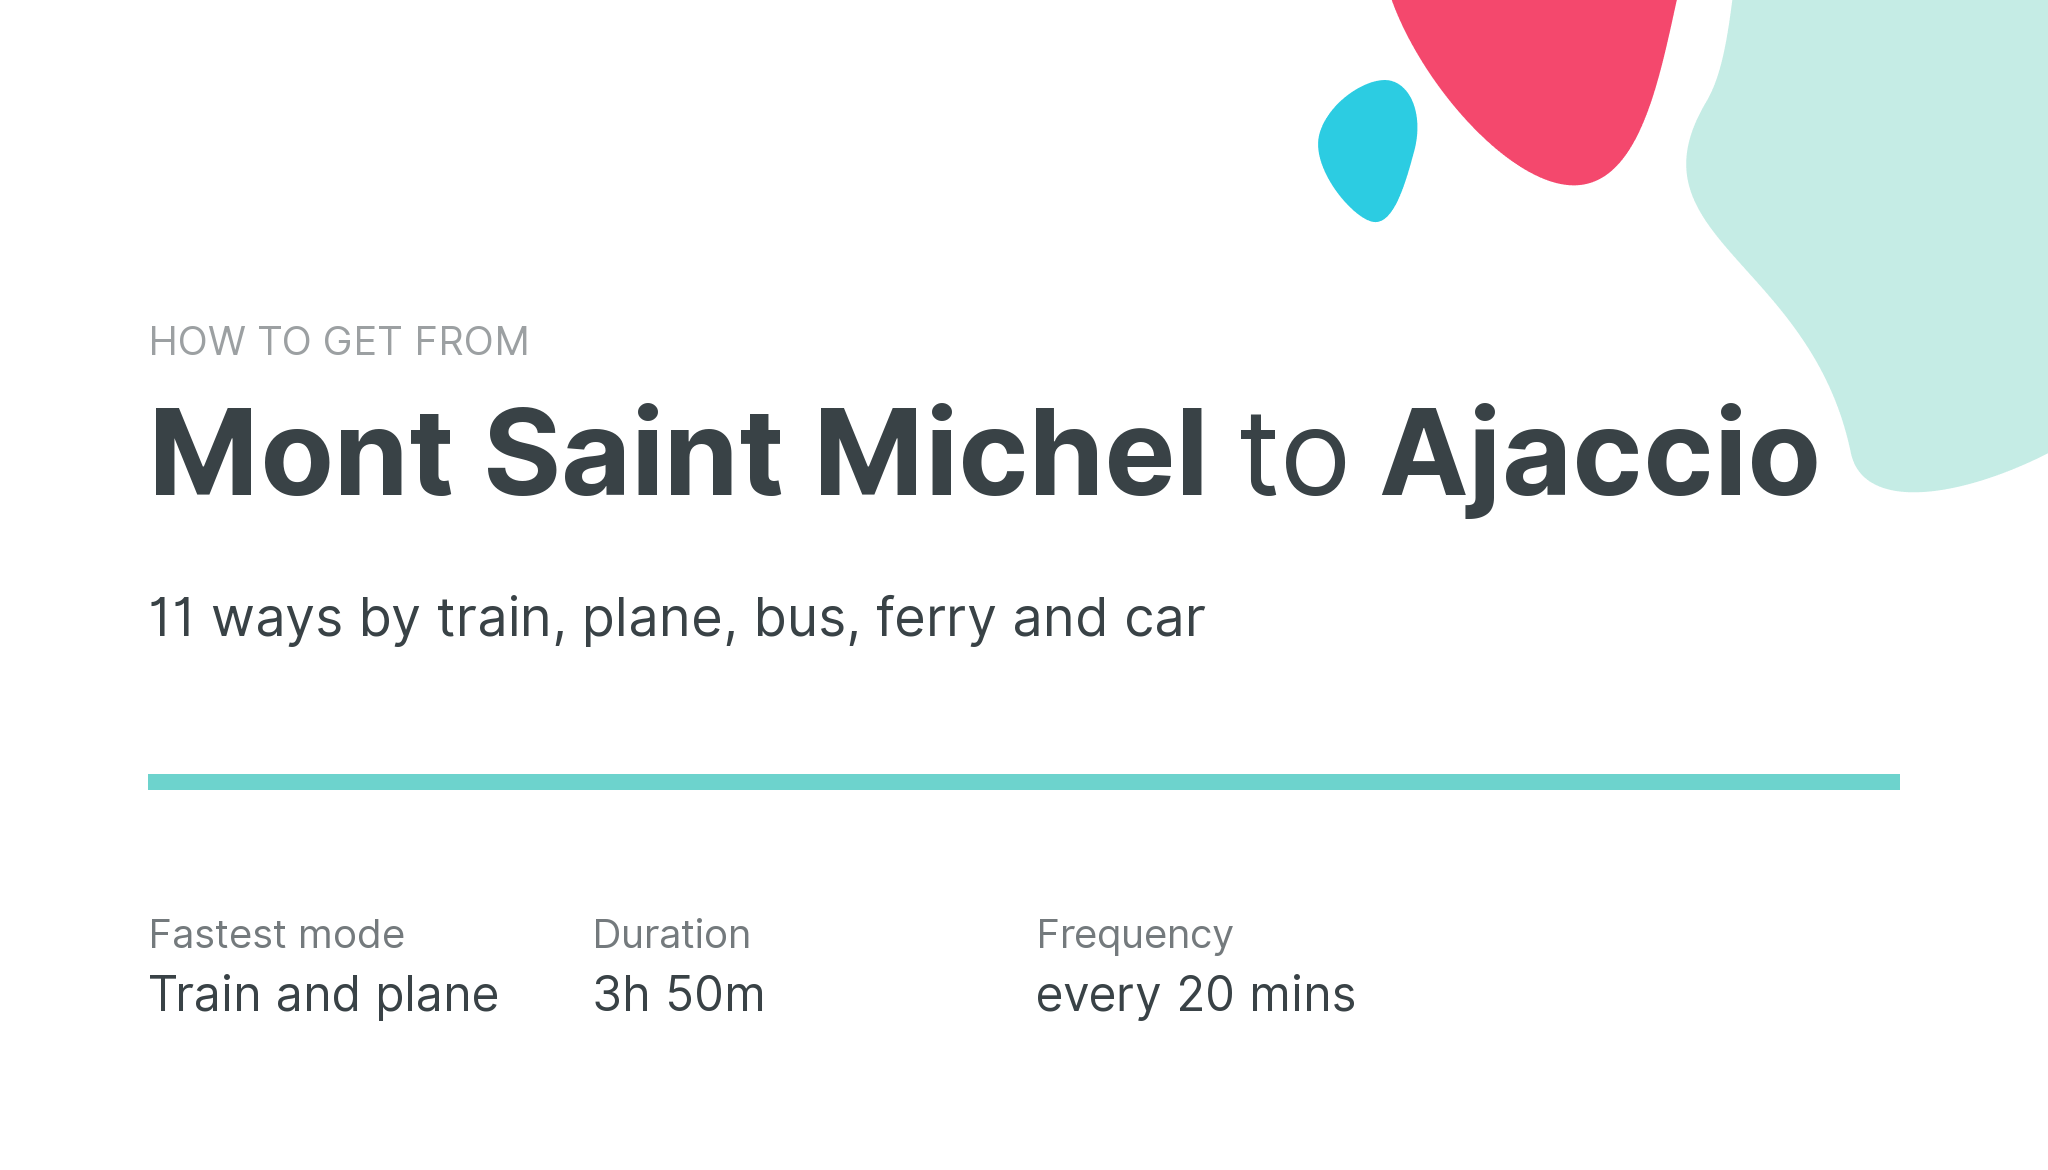 How do I get from Mont Saint Michel to Ajaccio